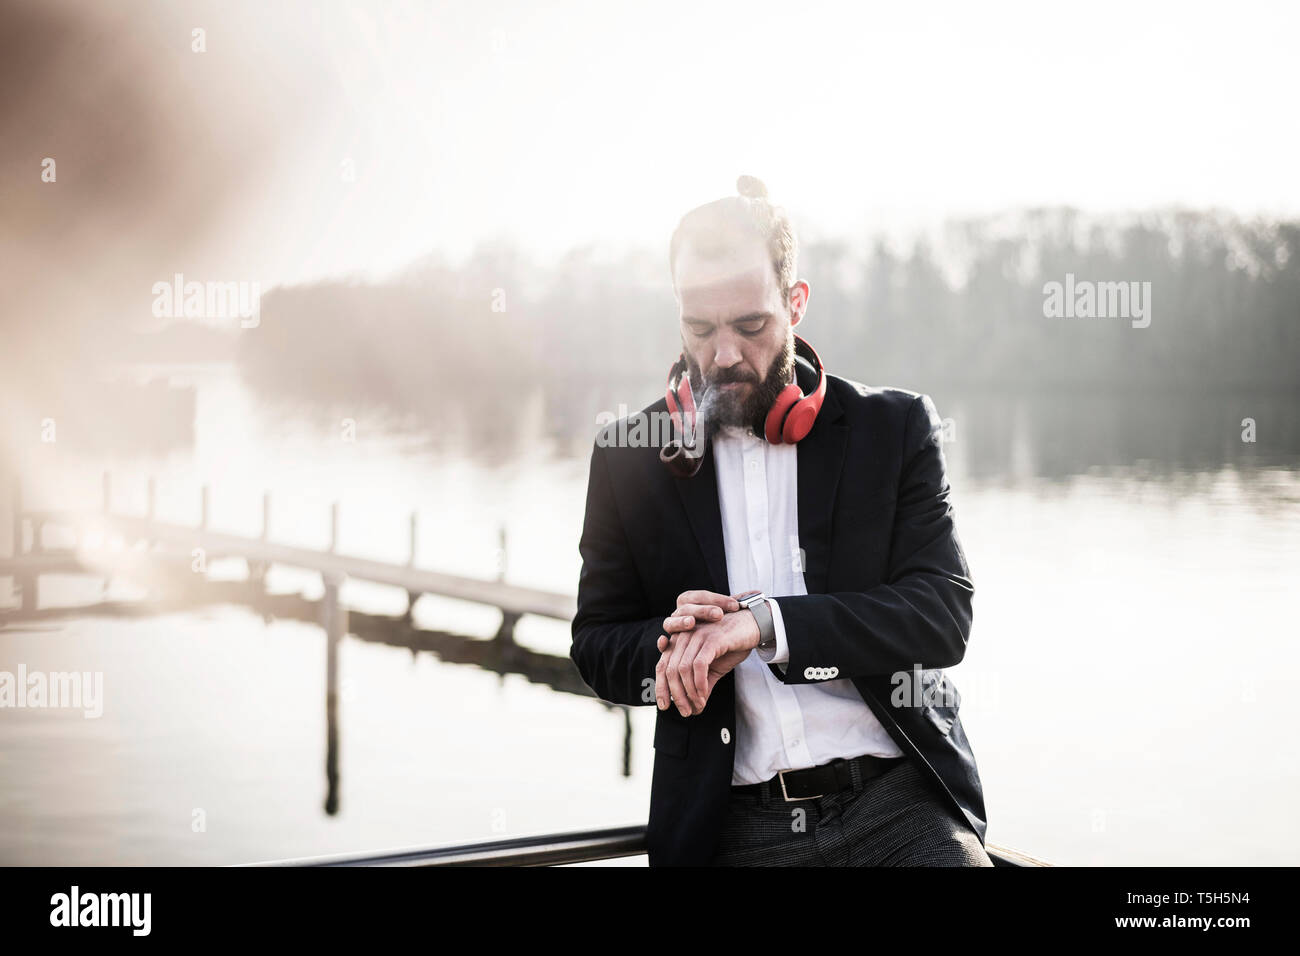 Businessman standing on a housebpat, smoking pipe, checking time Stock Photo